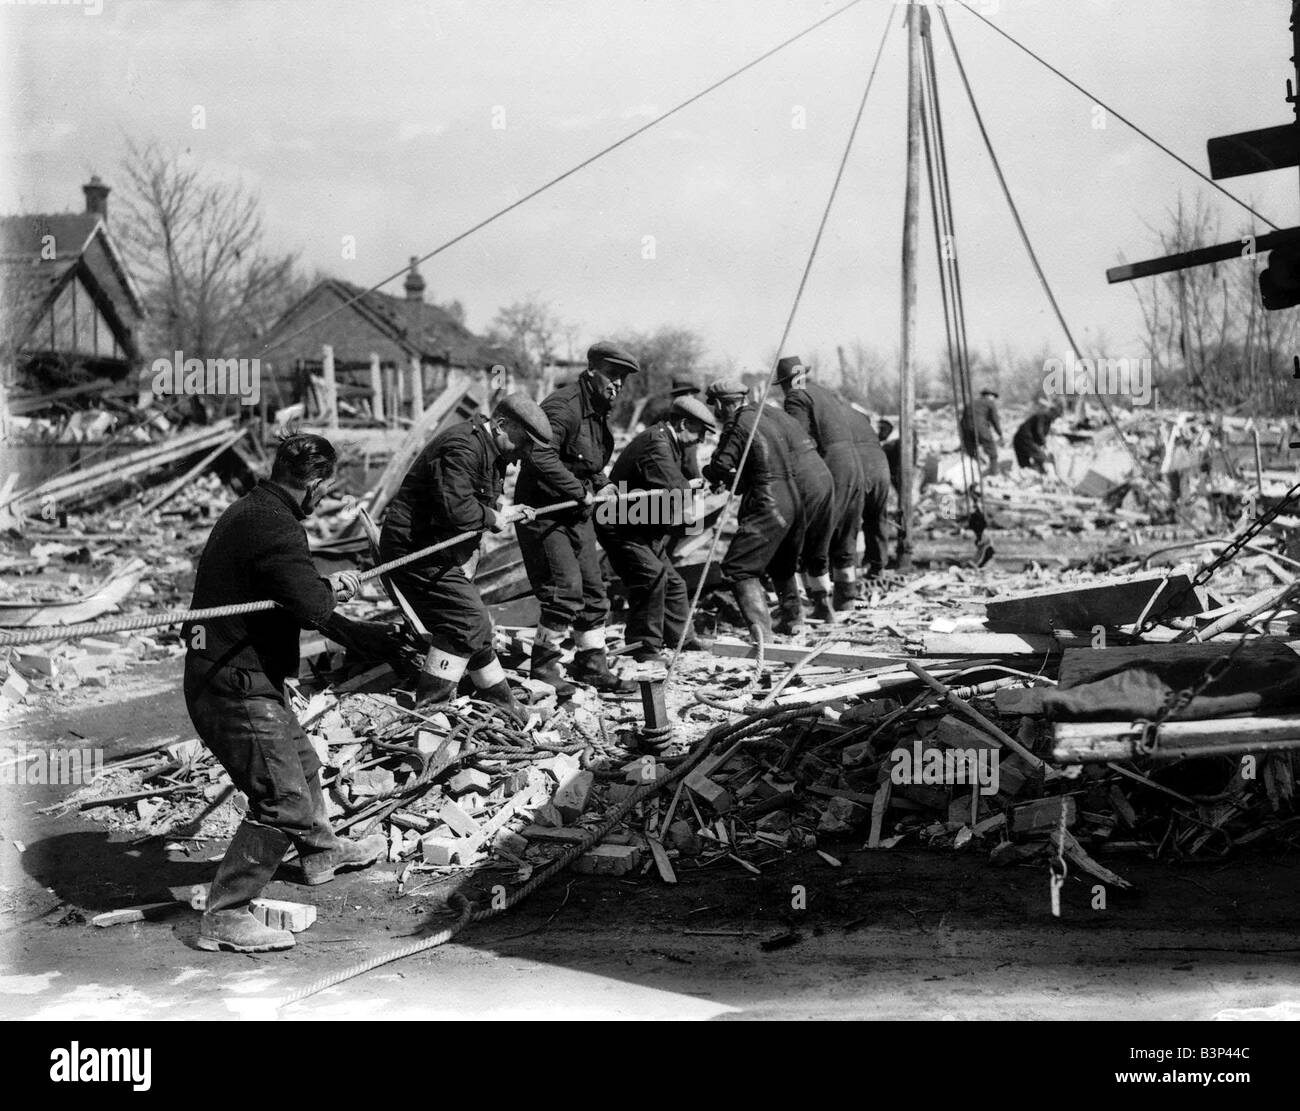 WW2 Air Raid Damage Bomb damage at Chigwell A group of men working together to clear the rubble left by the air raid bombs pulling on a rope Stock Photo